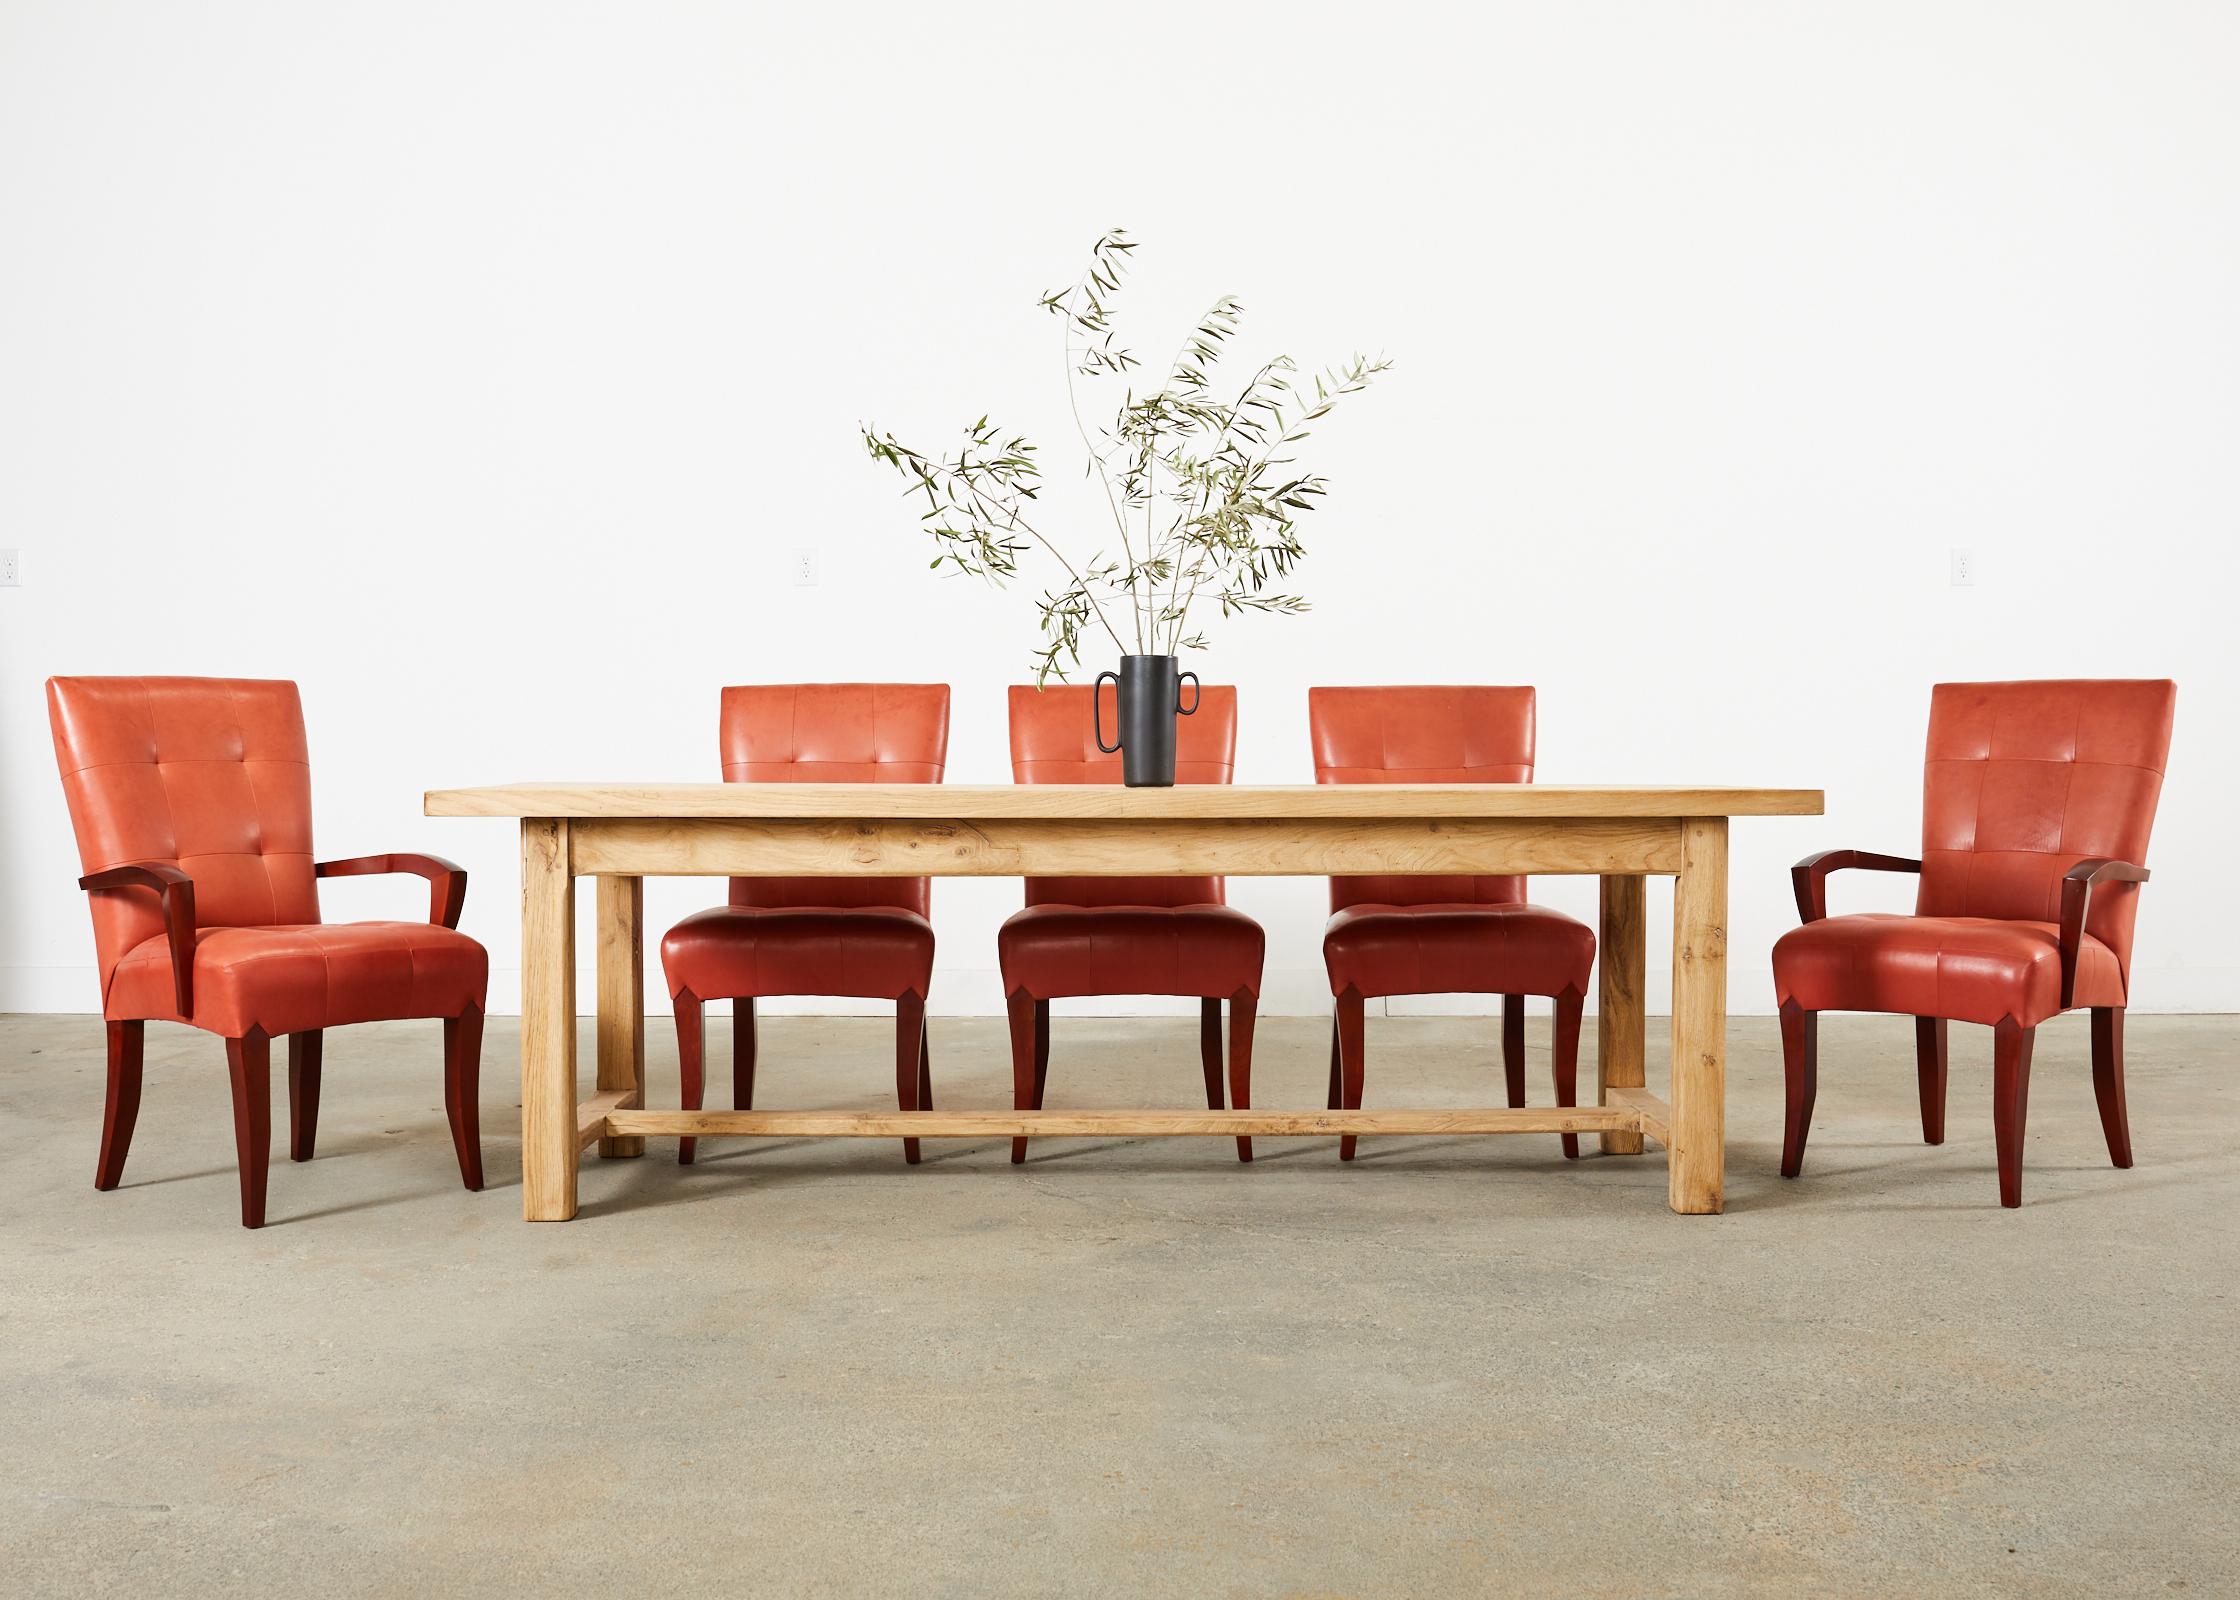 Matched set of eight dining chairs designed by Dakota Jackson. The set consists of six side chairs and two host armchairs with the arms measuring 24 inches wide and 25 inches high. Crafted from solid cherry frames and upholstered with a persimmon or